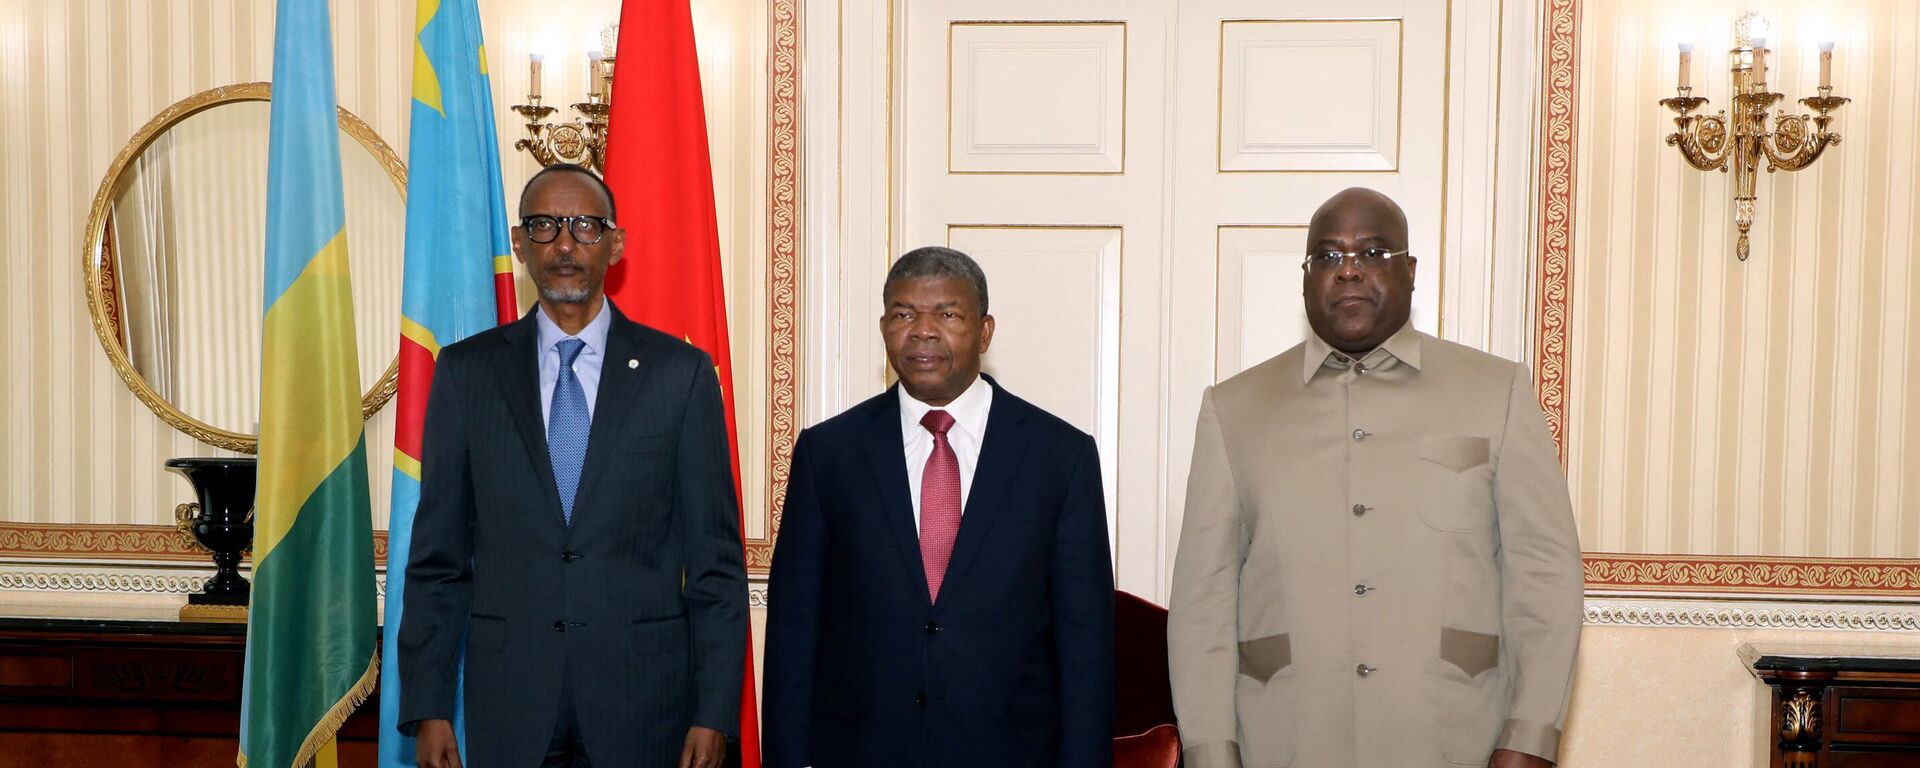 Rwanda President Paul Kagame (L), Angola President Joao Lourenco (C) and Democratic Republic of Congo President Felix Tshisekedi (R) pose for a photograph in Luanda on July 6, 2022, as they meet for talks after an upsurge in violence in eastern DRC. - Sputnik International, 1920, 06.07.2022